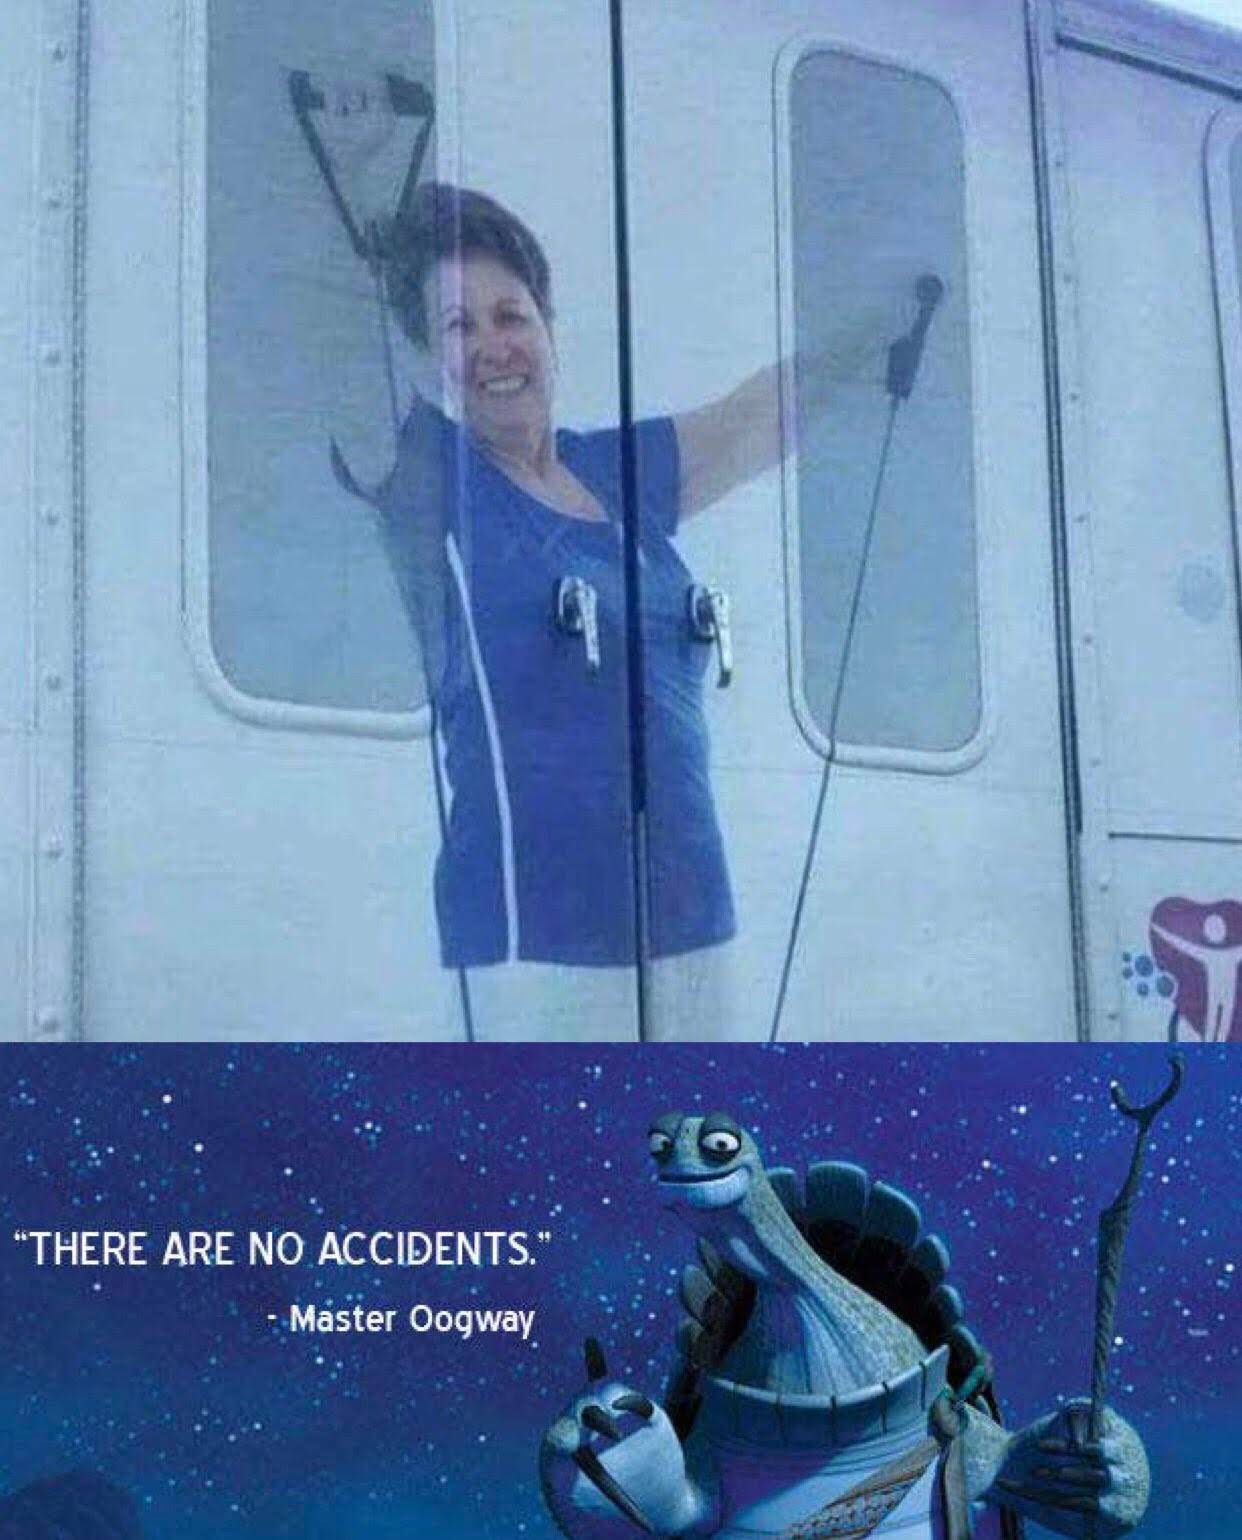 dank memes - there are no accidents meme - "There Are No Accidents. Master Oogway